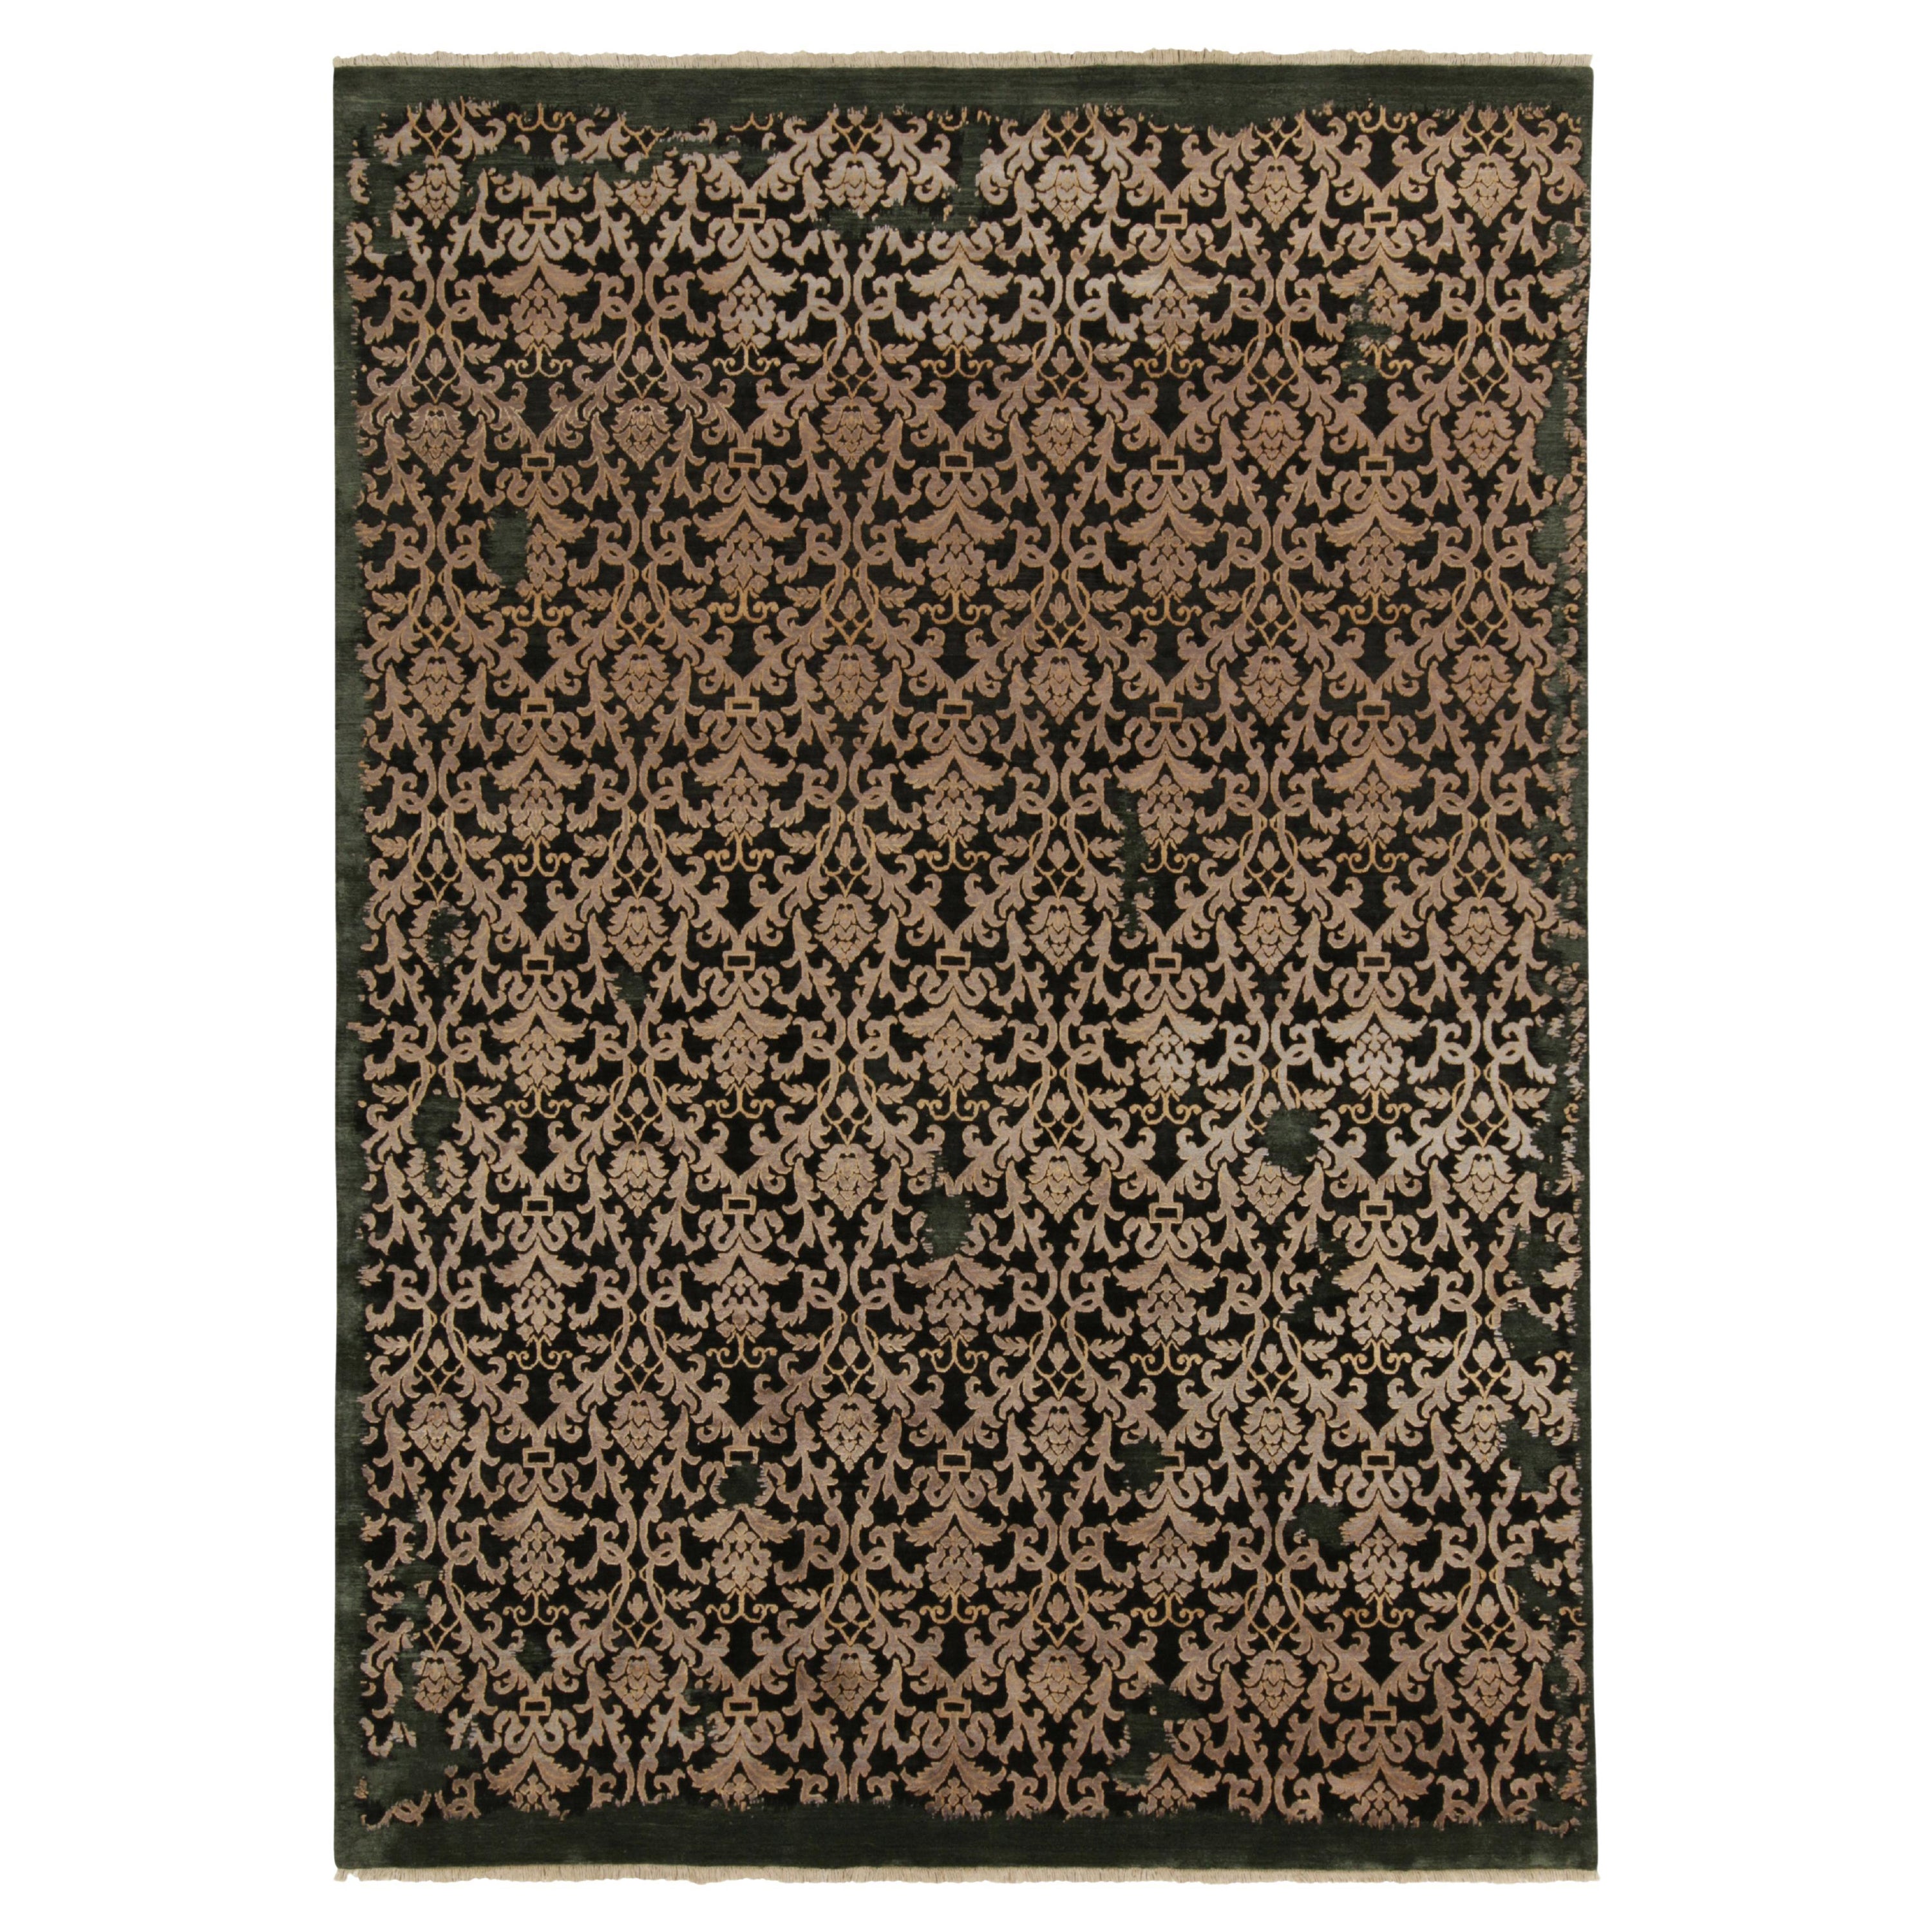 Rug & Kilim’s Classic-Style Rug in Silver Floral Patterns on Black & Green For Sale